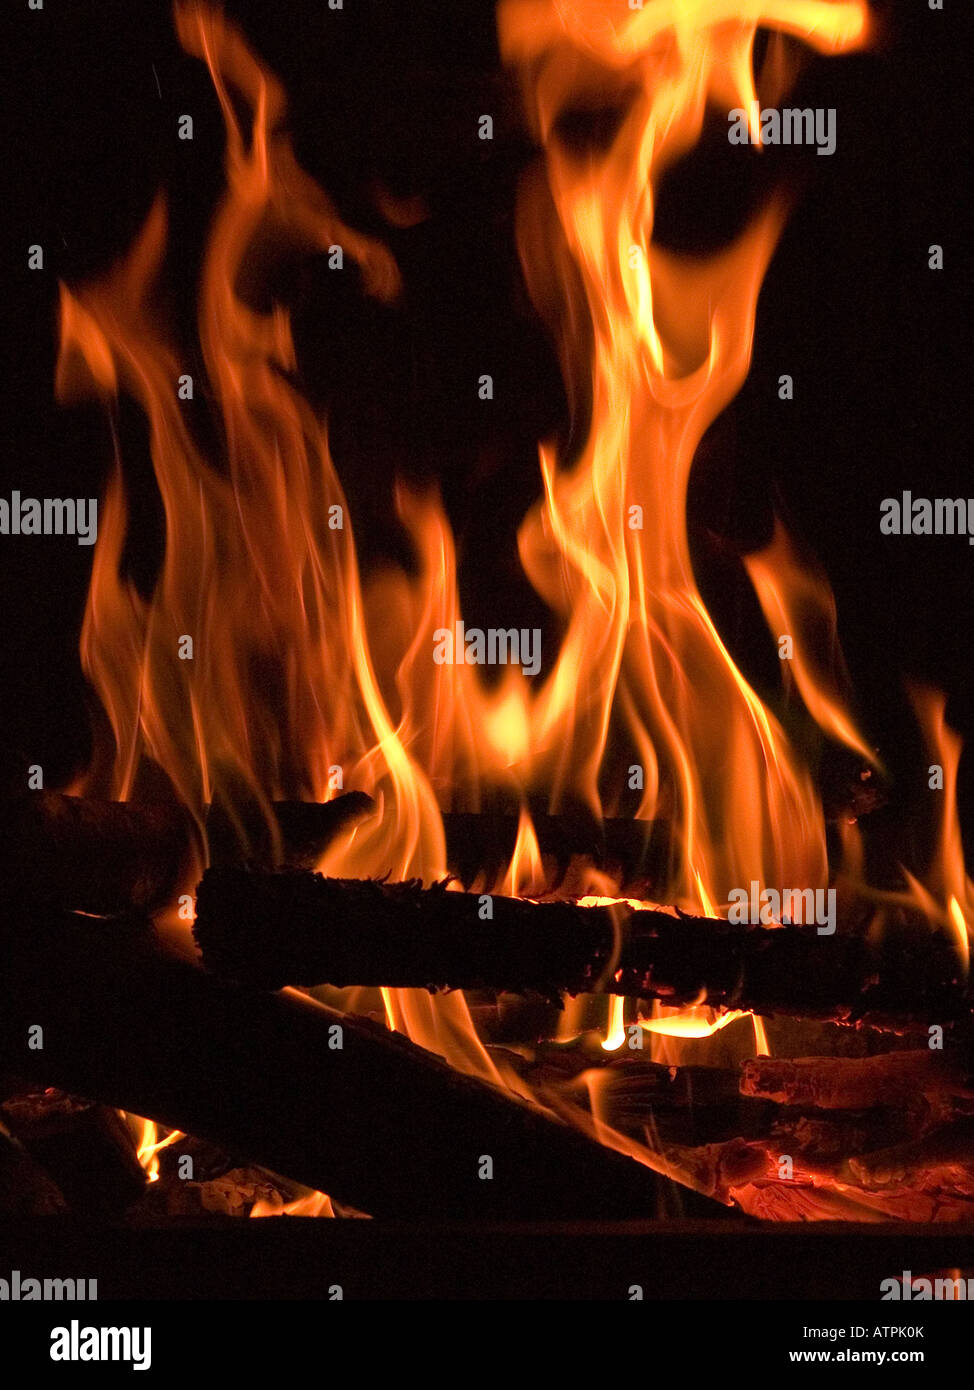 fire flames burning Stock Photo